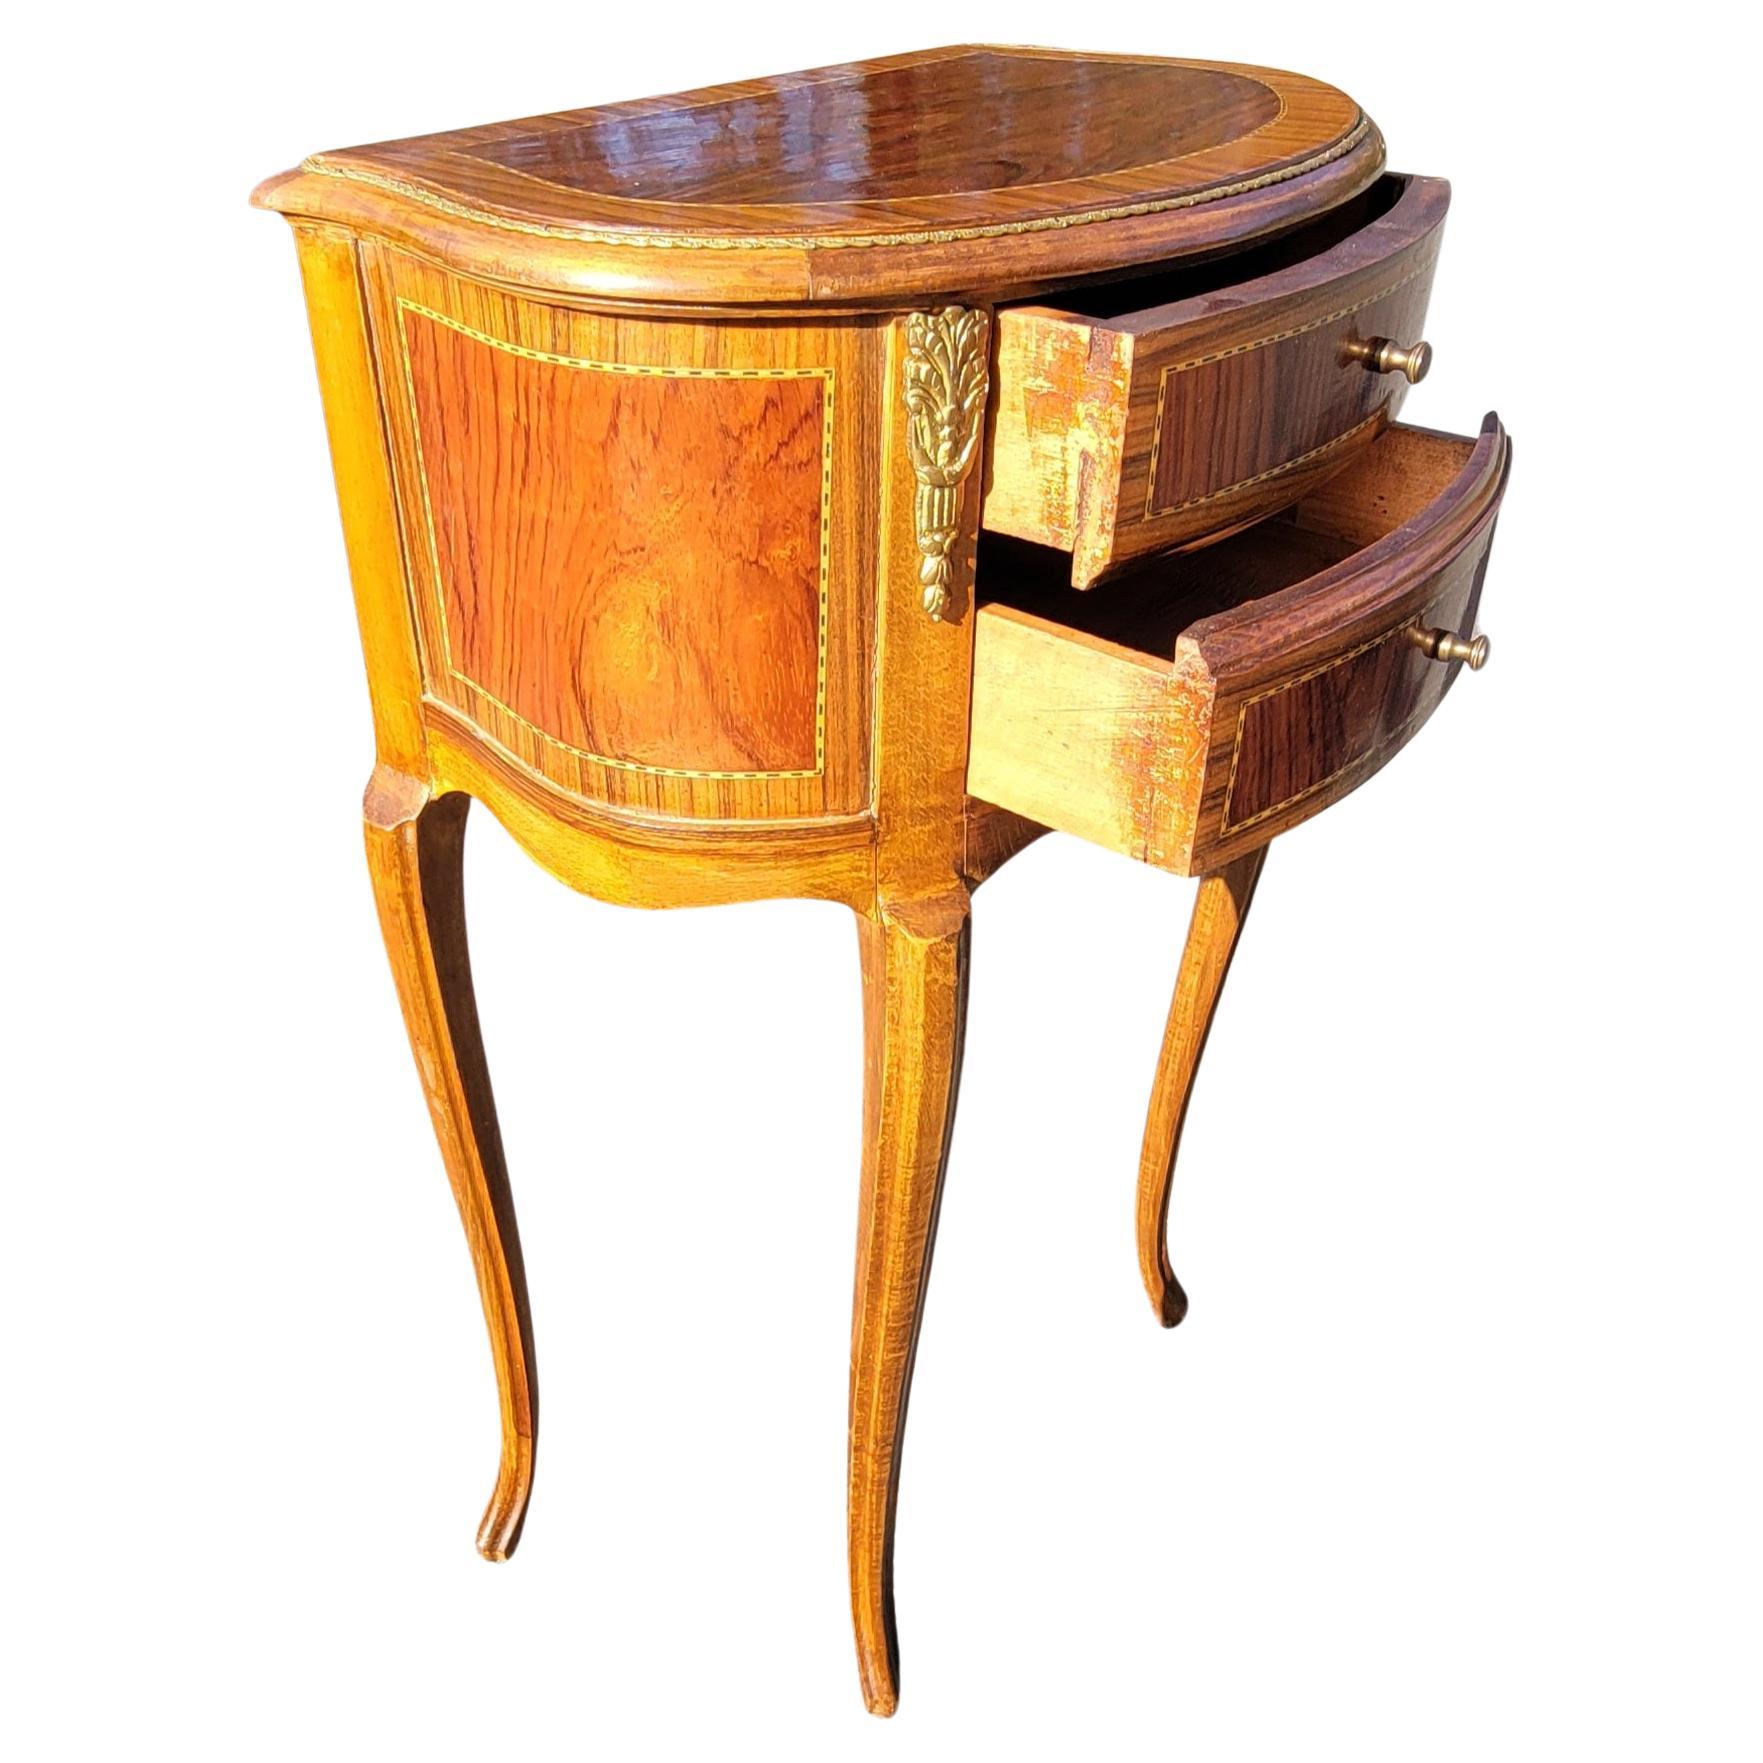 20th Century French Louis XV Walnut Kingwood Satinwood Inlaid Ormolu Side Table In Good Condition For Sale In Germantown, MD